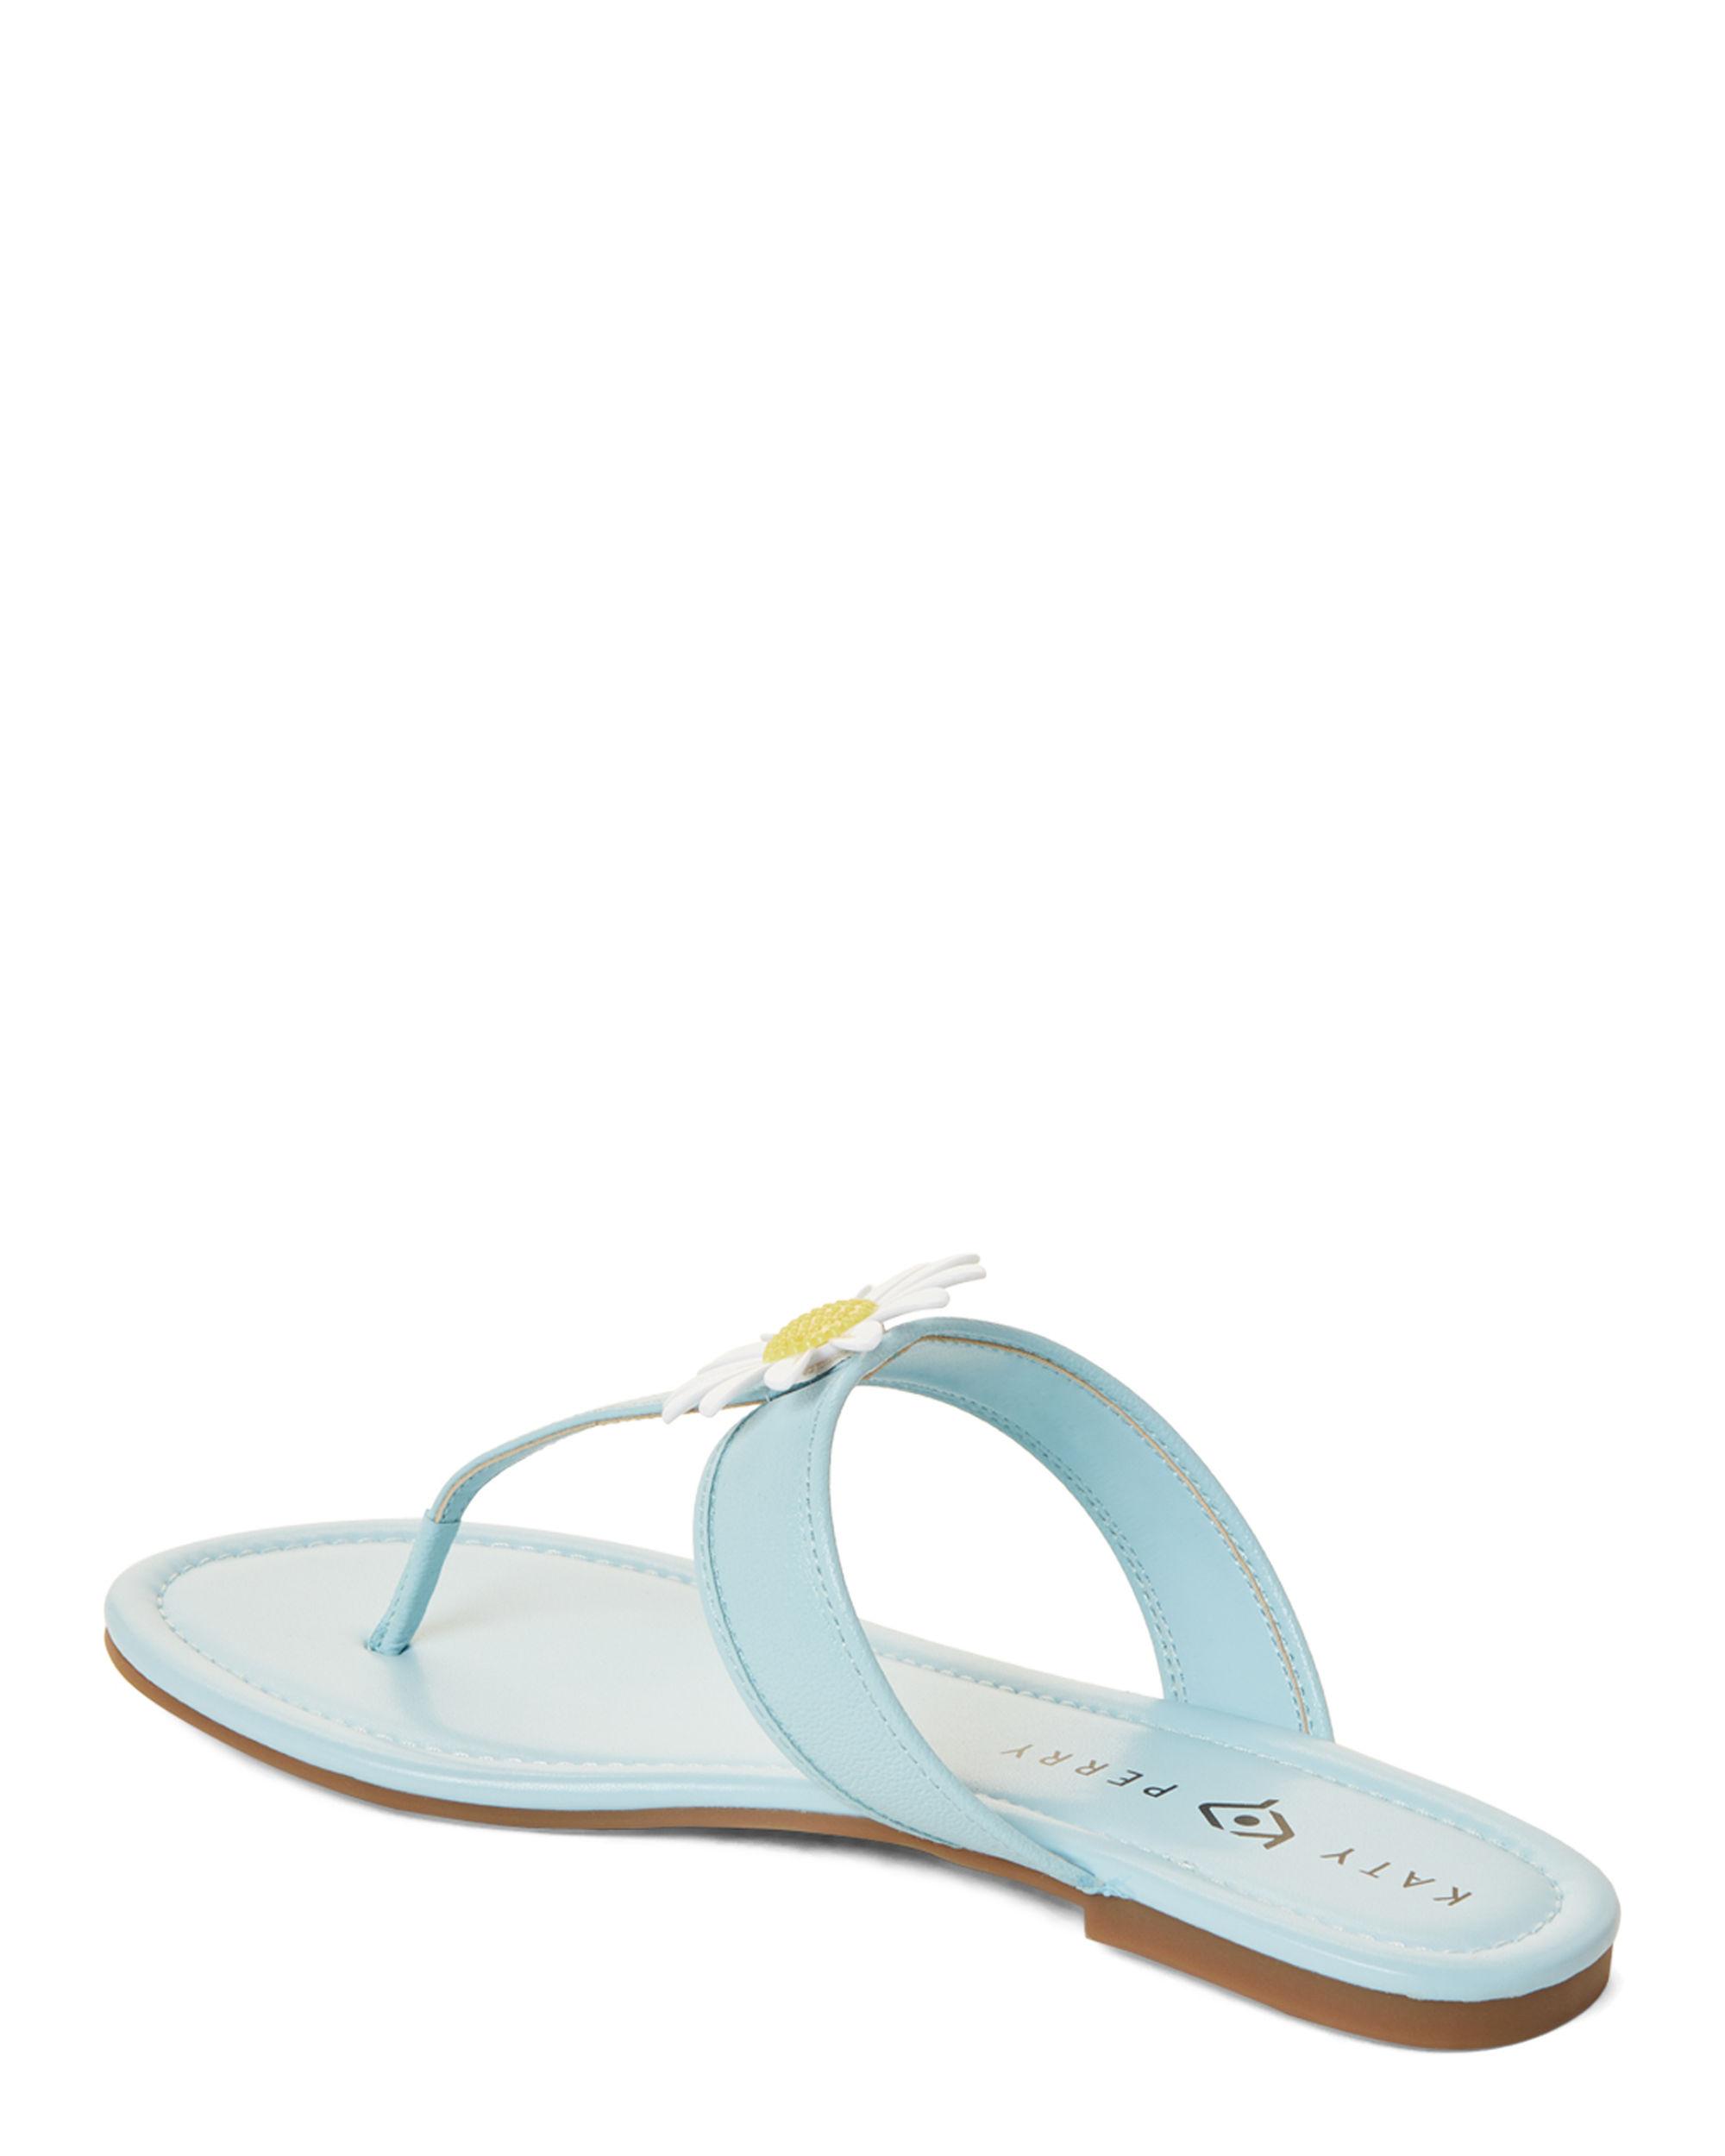 Katy Perry Forget Me Not Thong Flat Sandals in Light Blue (Blue) - Lyst